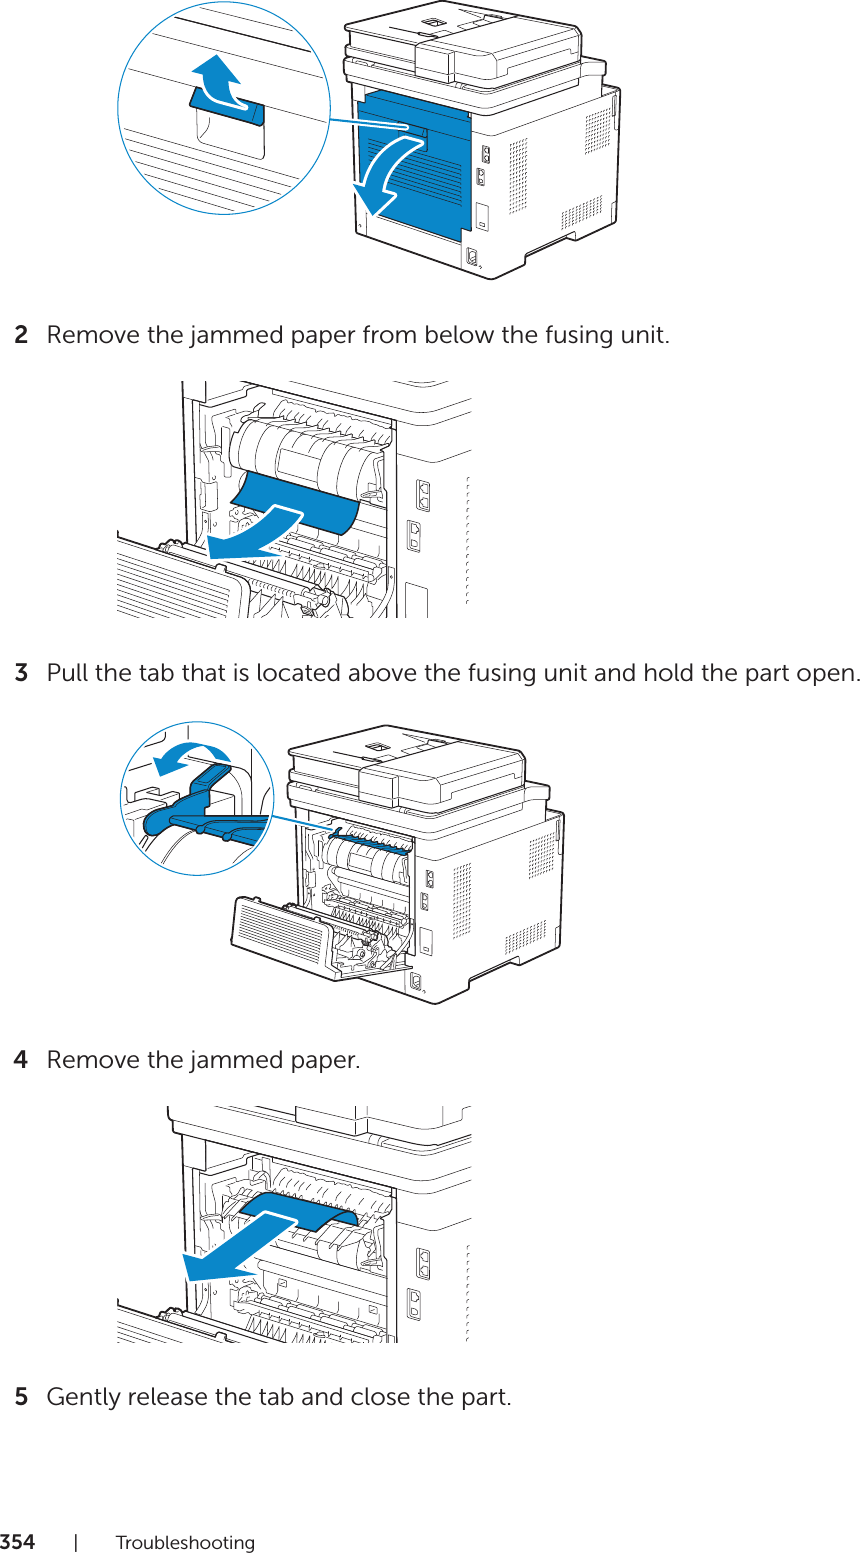 354|Troubleshooting2Remove the jammed paper from below the fusing unit.3Pull the tab that is located above the fusing unit and hold the part open.4Remove the jammed paper.5Gently release the tab and close the part.